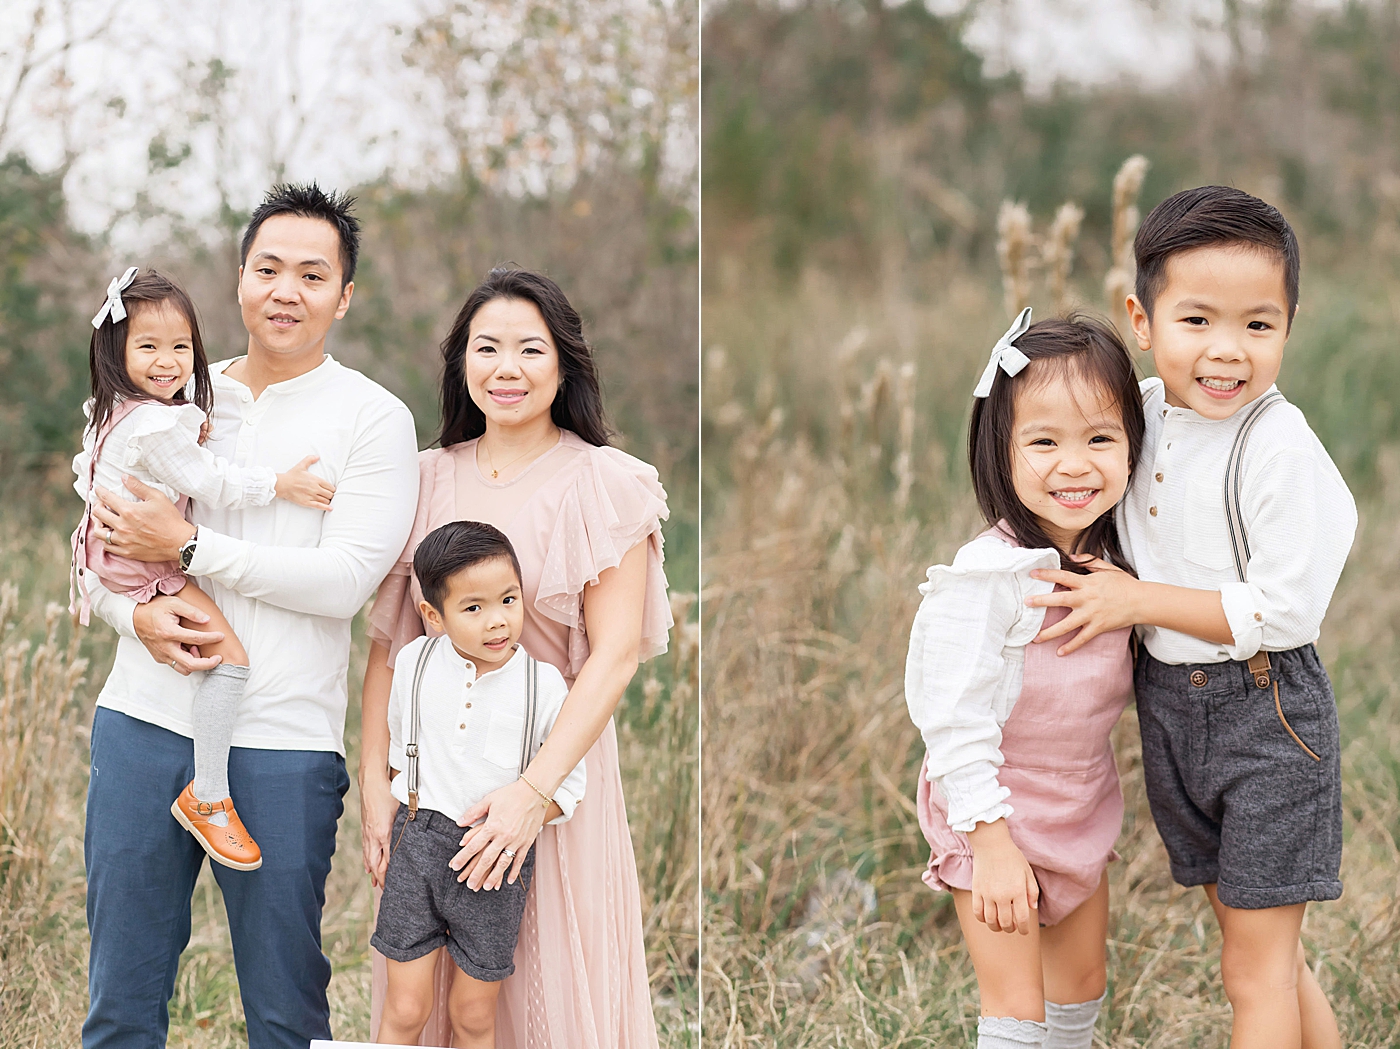 Inspiration for what to wear for family portraits this fall. Photo by Fresh Light Photography.